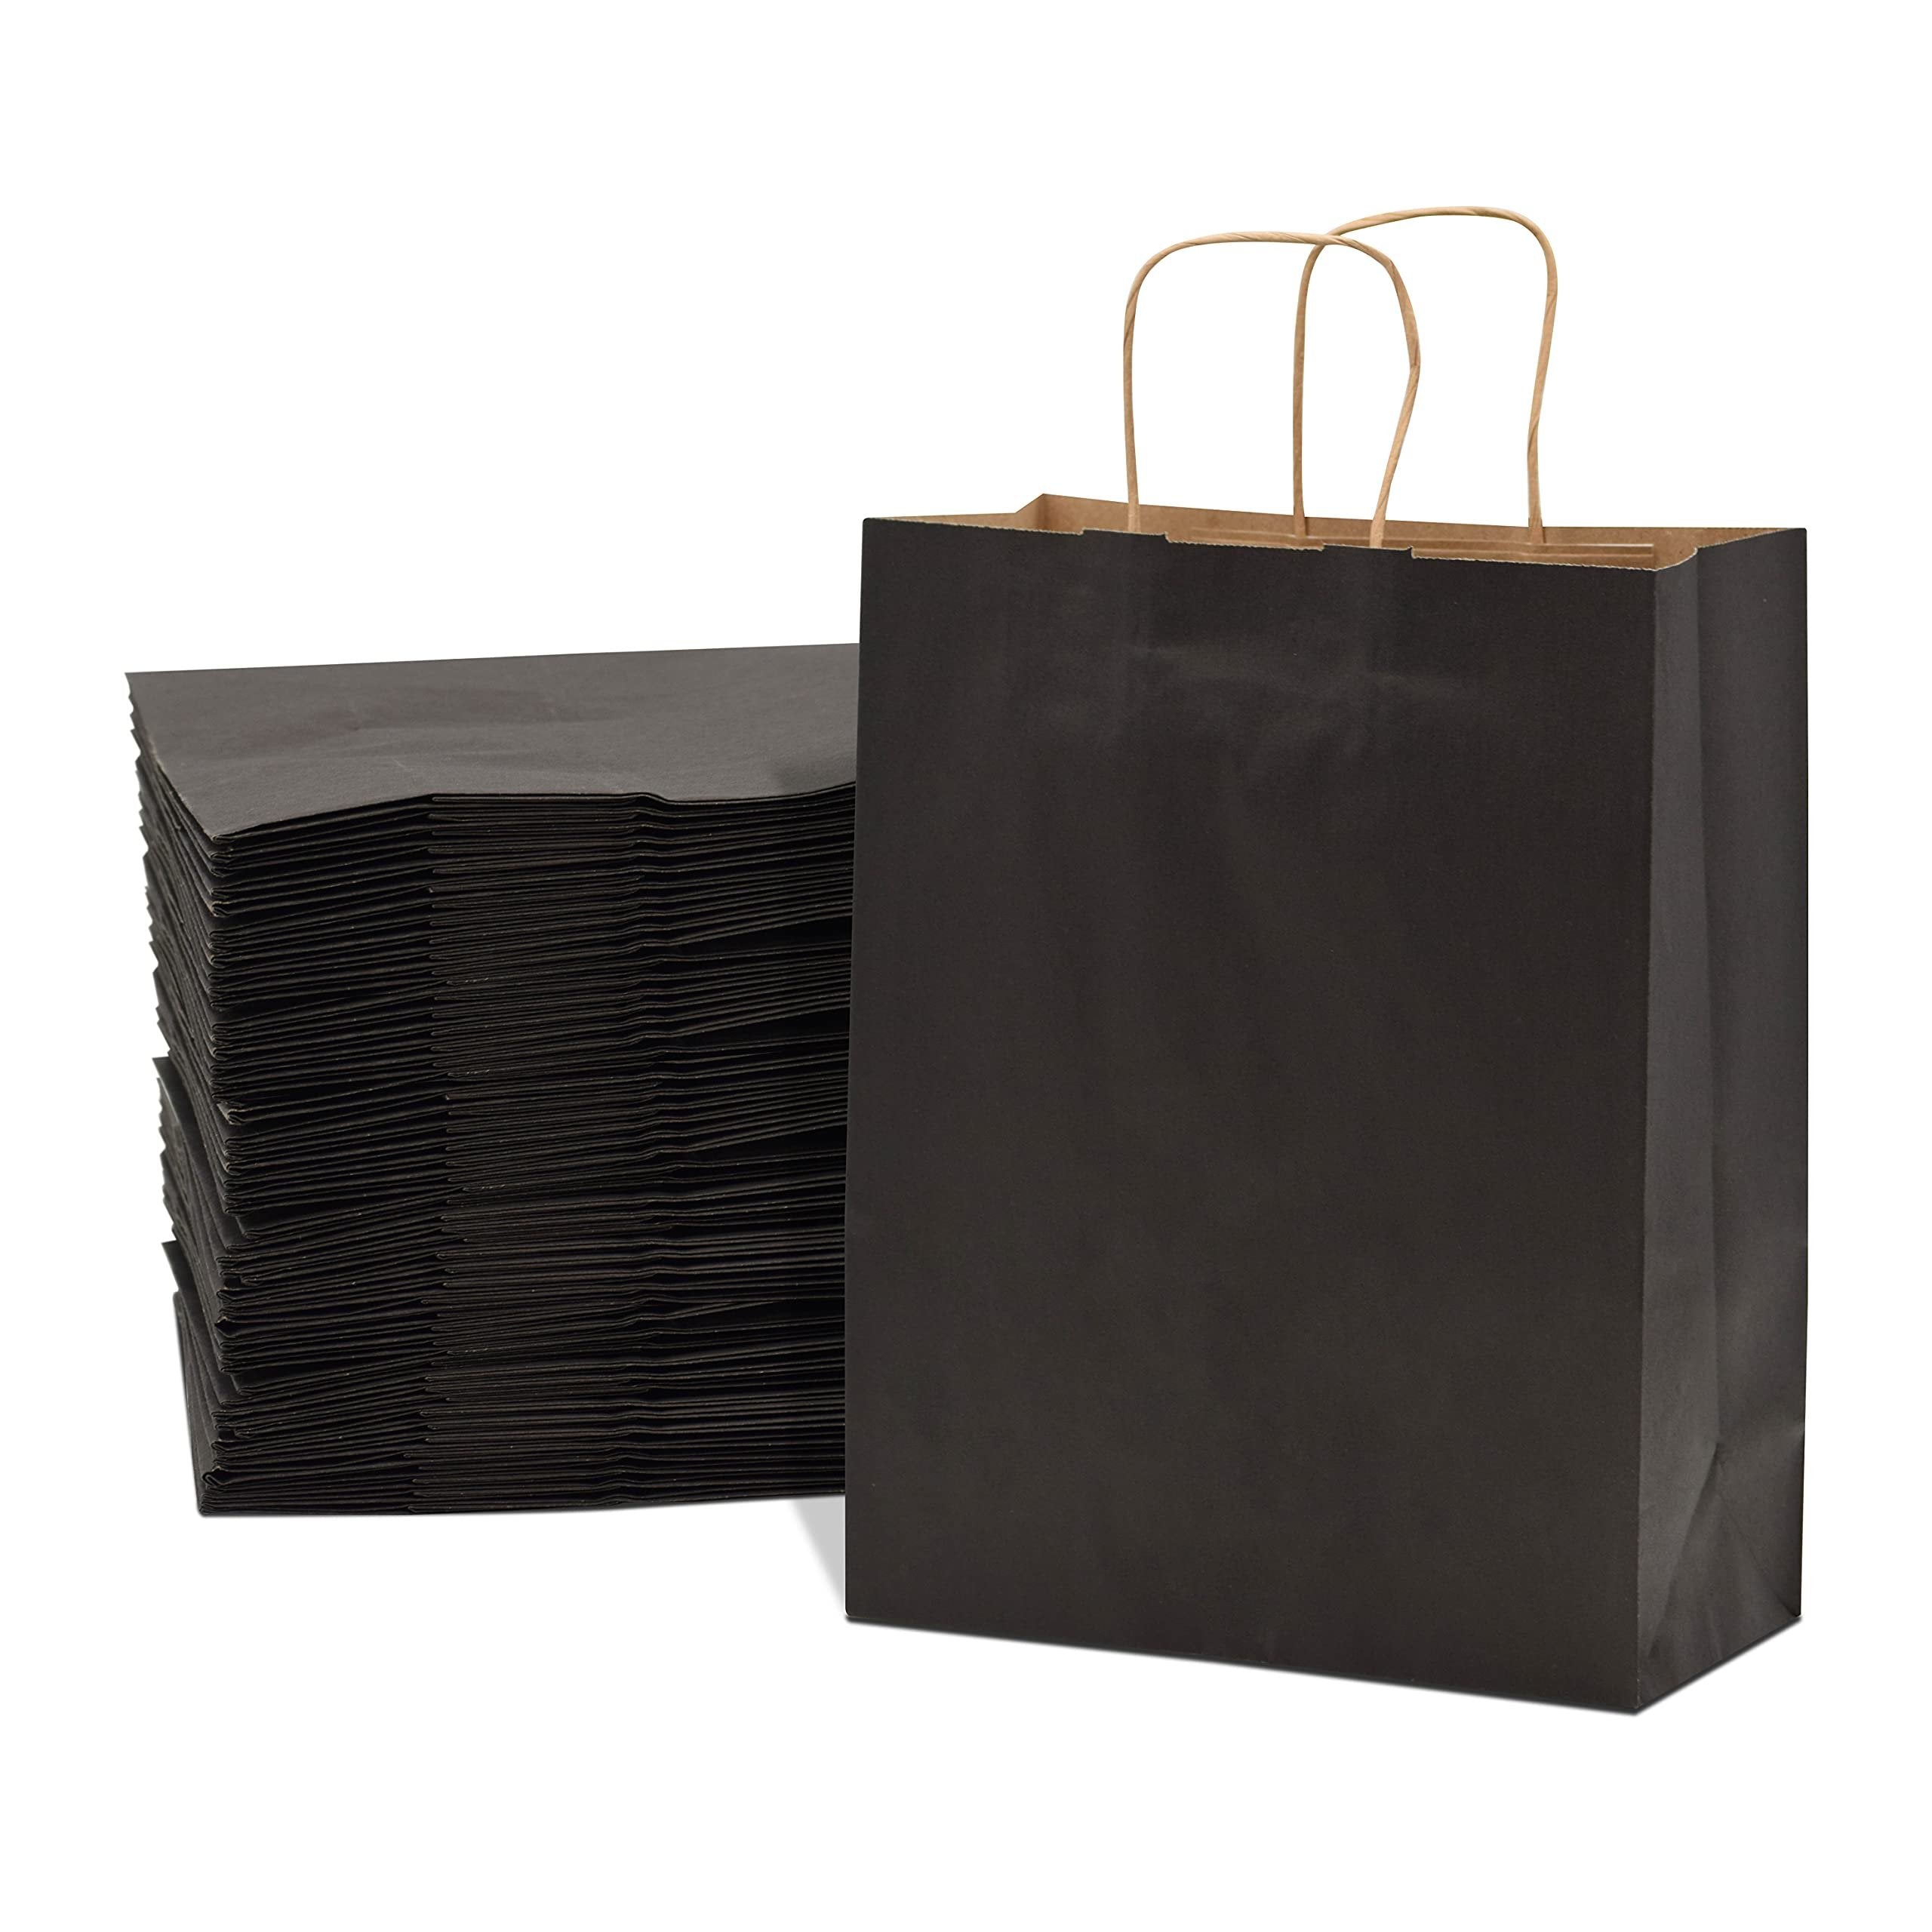 Black Paper Bags - 10x5x13 Inch 50 Pack Medium Kraft Shopping Bags with Handles, Craft Gift Totes in Bulk for Boutiques, Small Business, Retail Stores, Birthdays, Party Favors, Jewelry, Merchandise